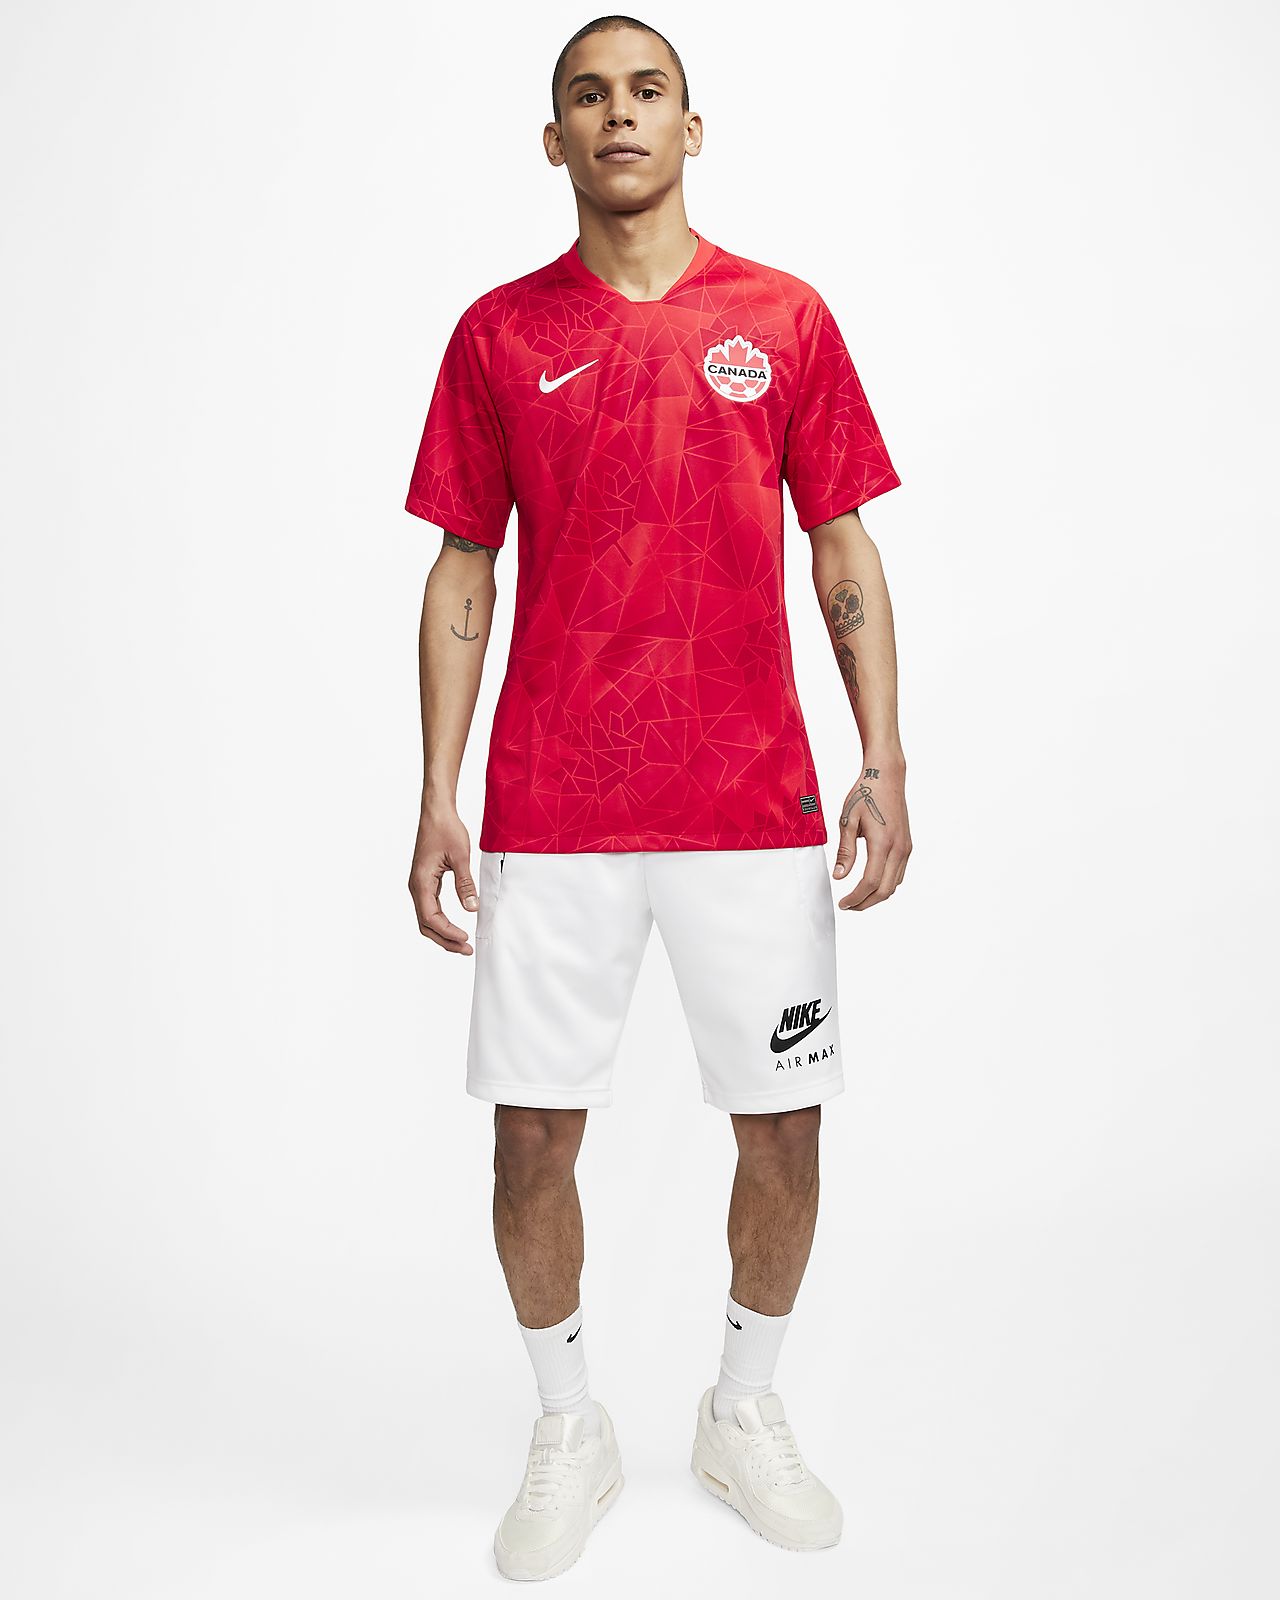 Canada home kit